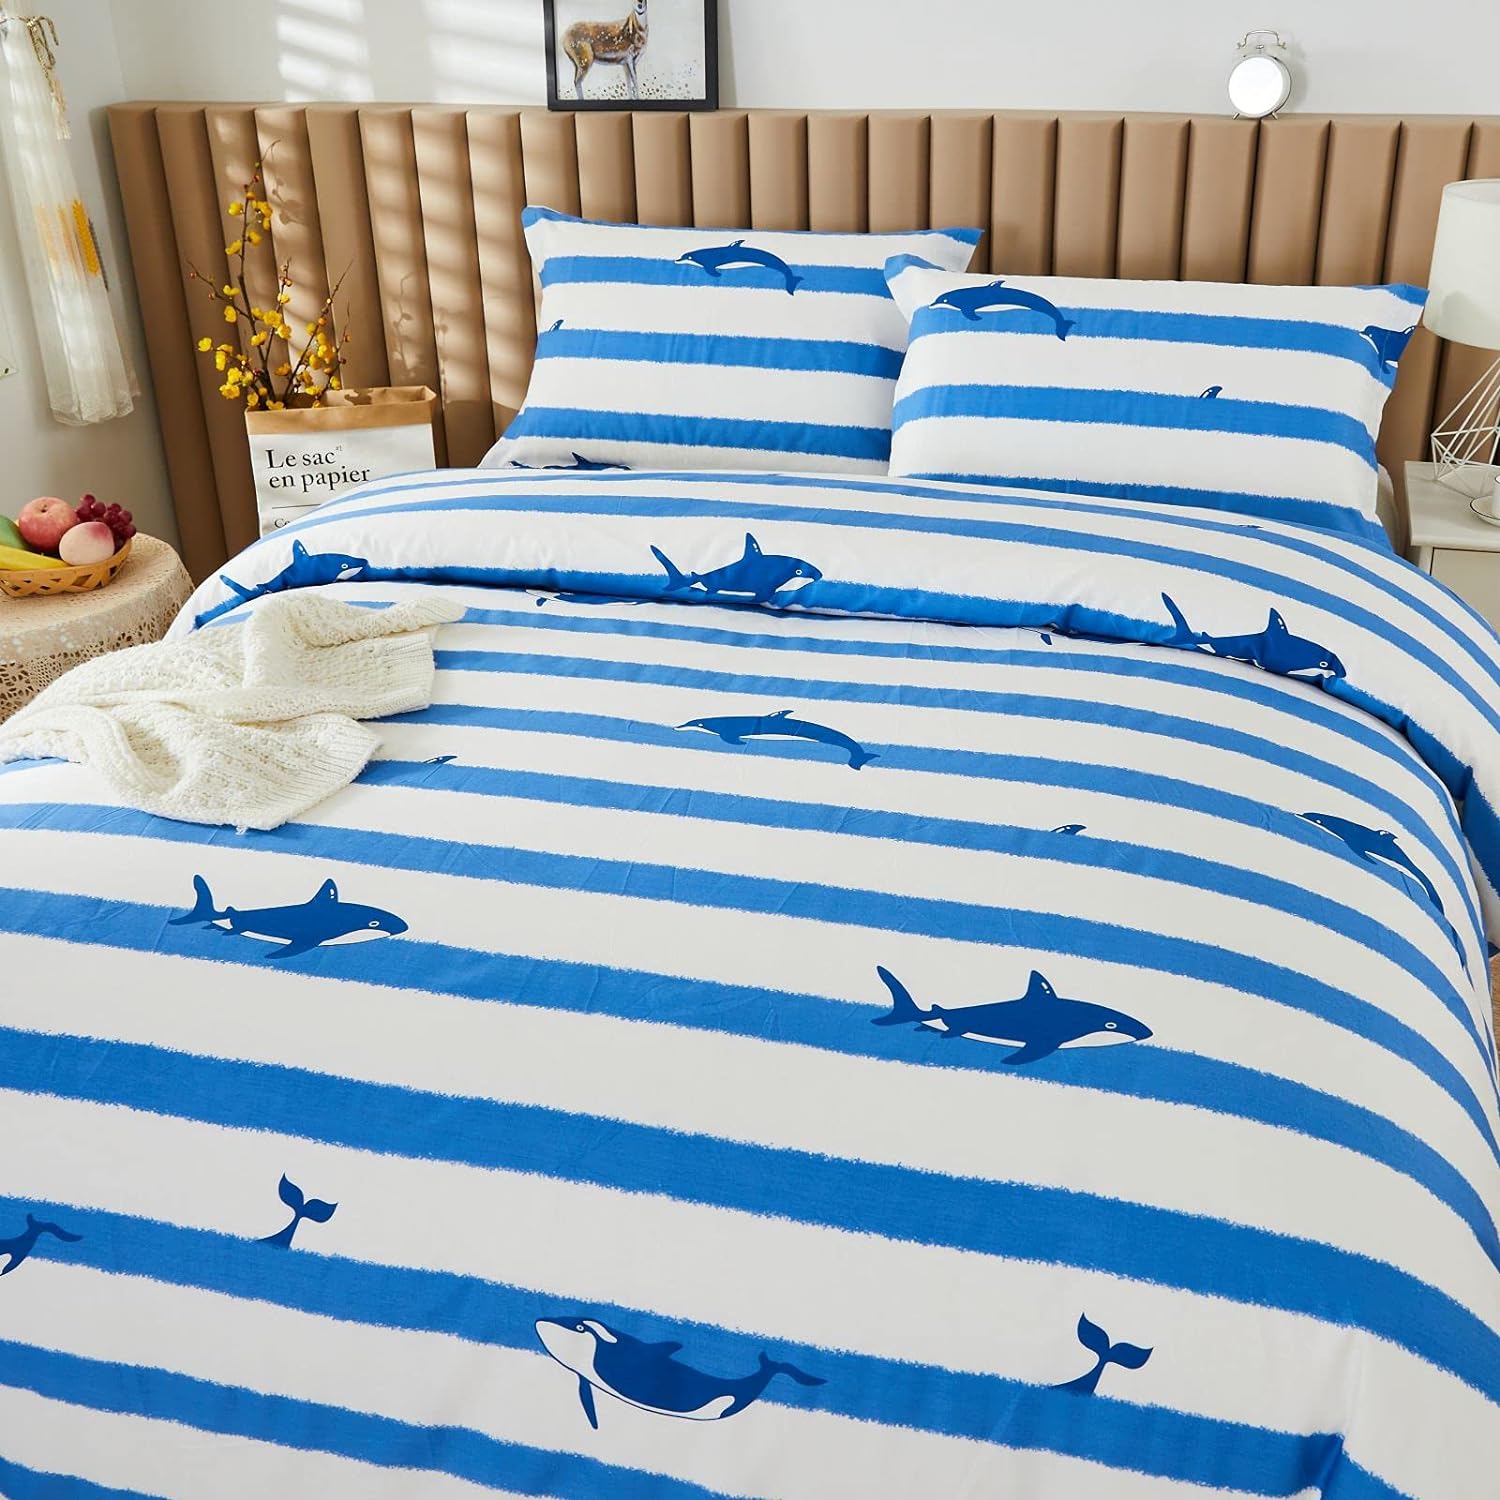 Great Choice Products Boy Bedding Sets Full Size Cotton Kid Girl Nautical Blue Striped Whale Bedding Bedroom Set Reversible Duvet Cover Set 3-Pi…